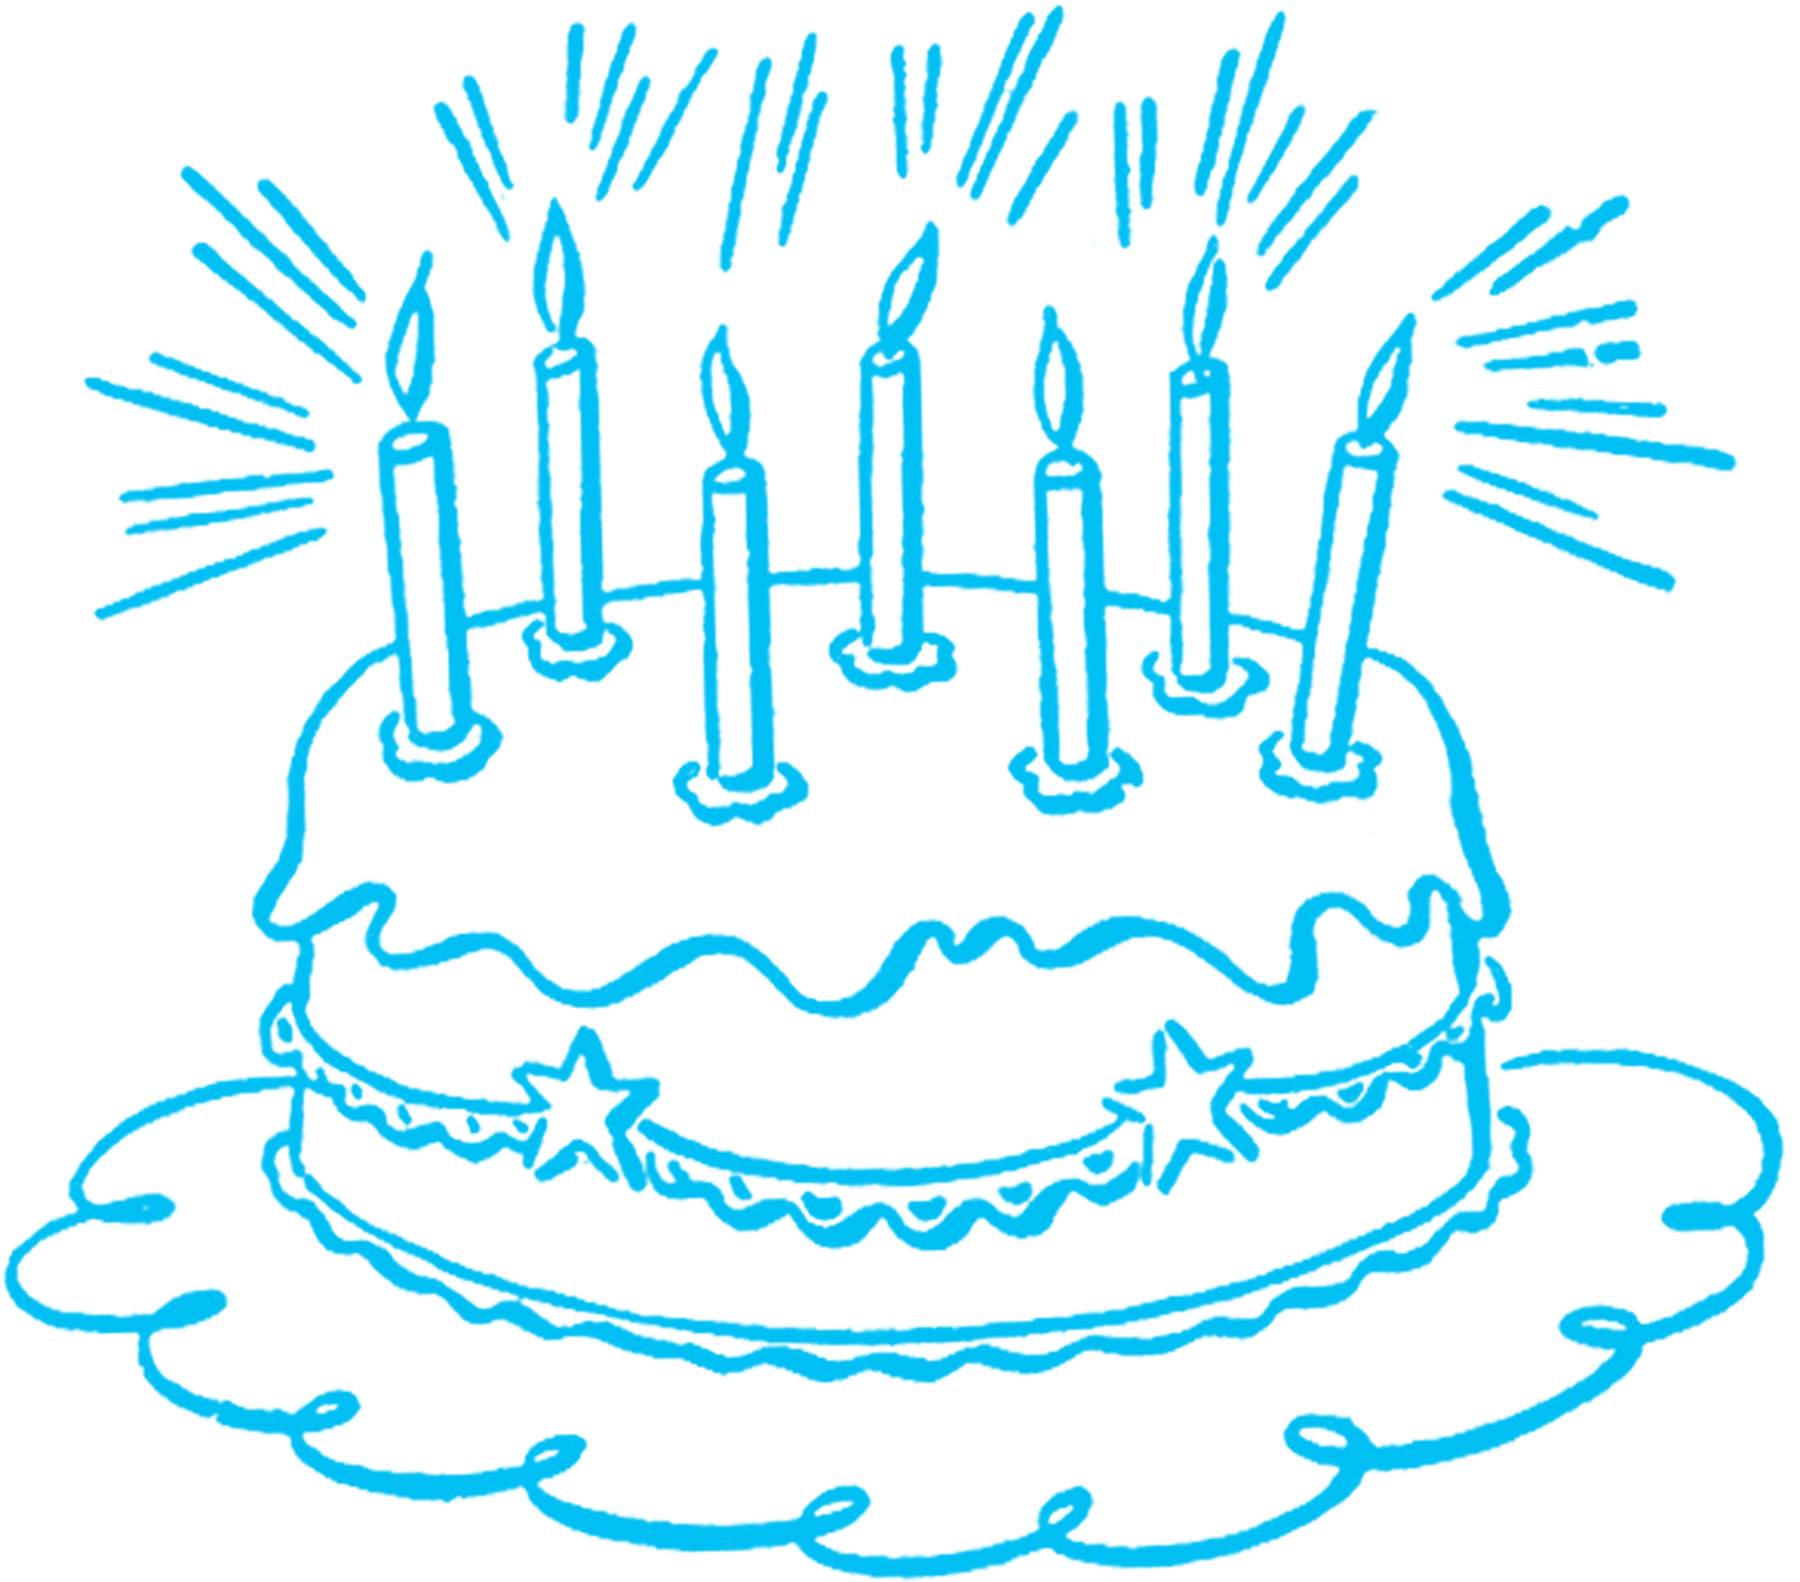 Free Birthday Cakes Graphics, Download Free Clip Art, Free.